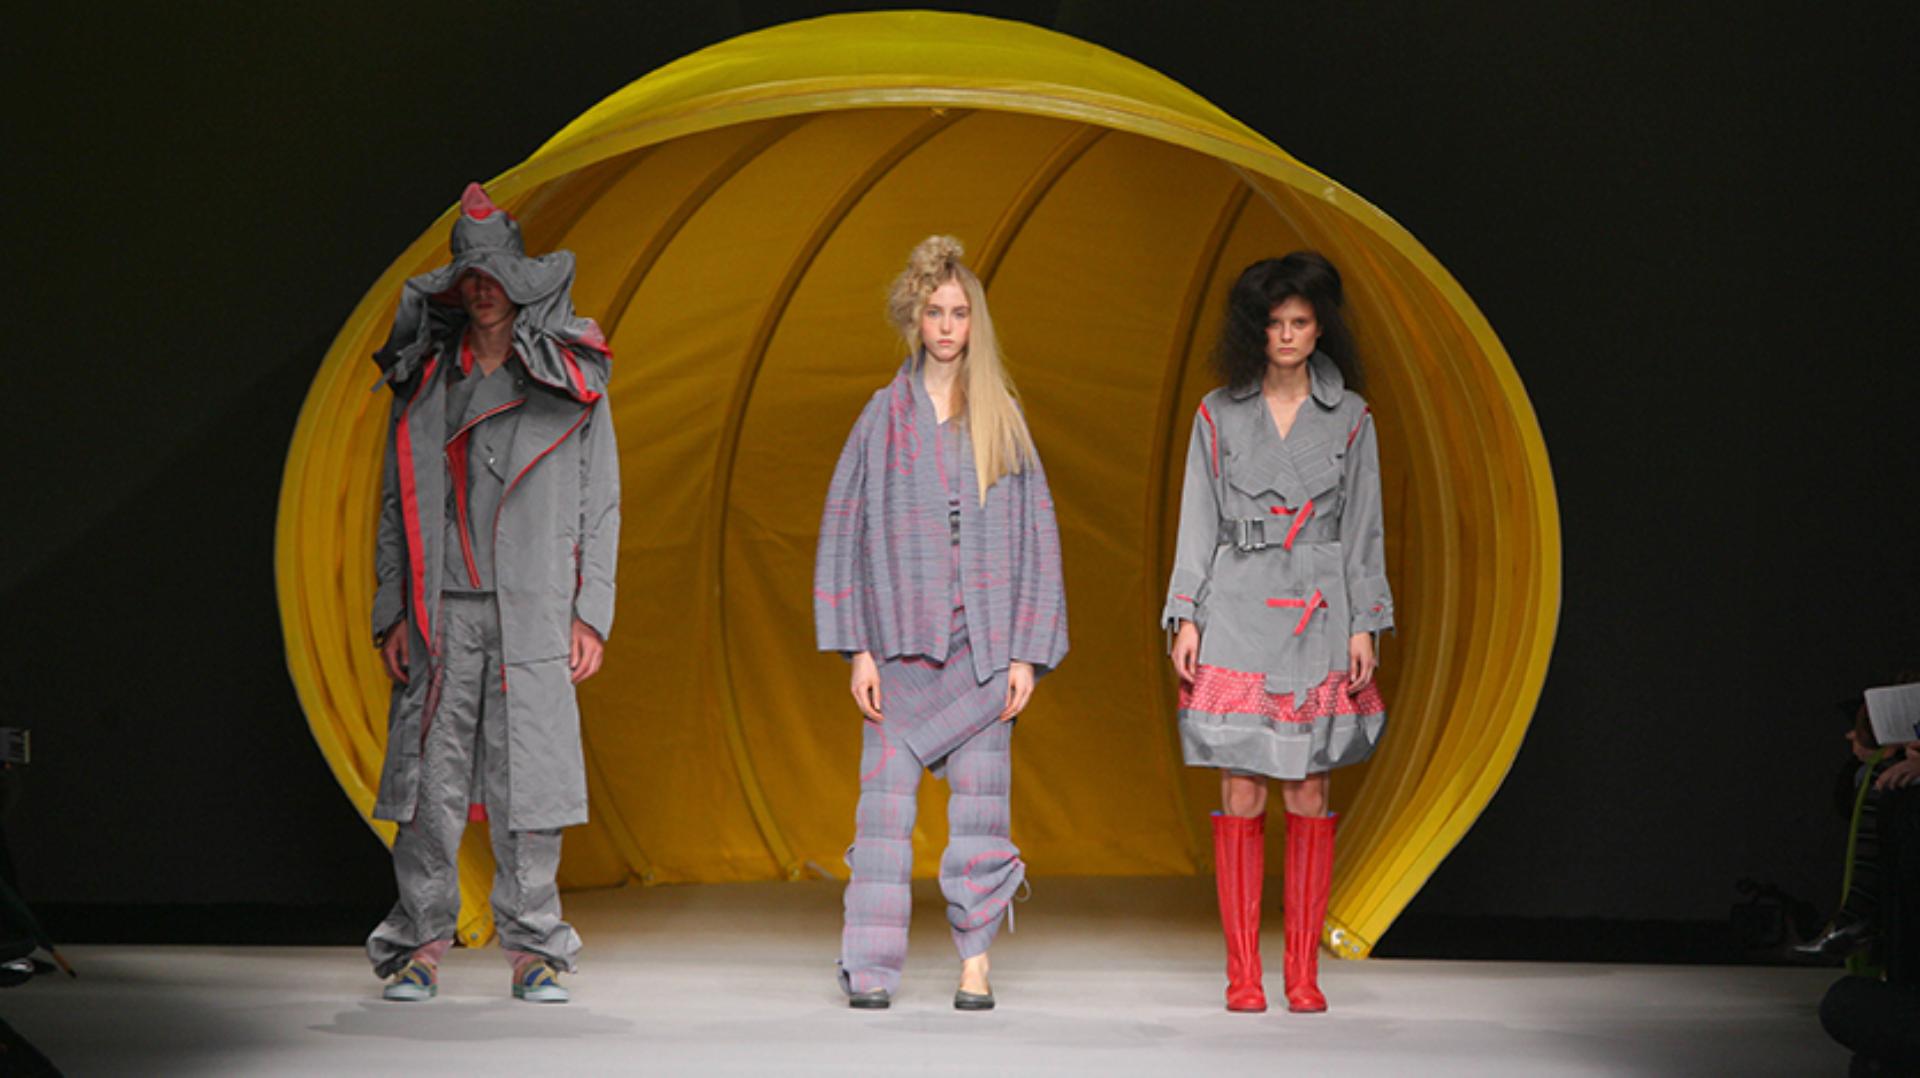 Models emerging from a giant yellow hose in Dyson vacuum-inspired designs onto the runaway